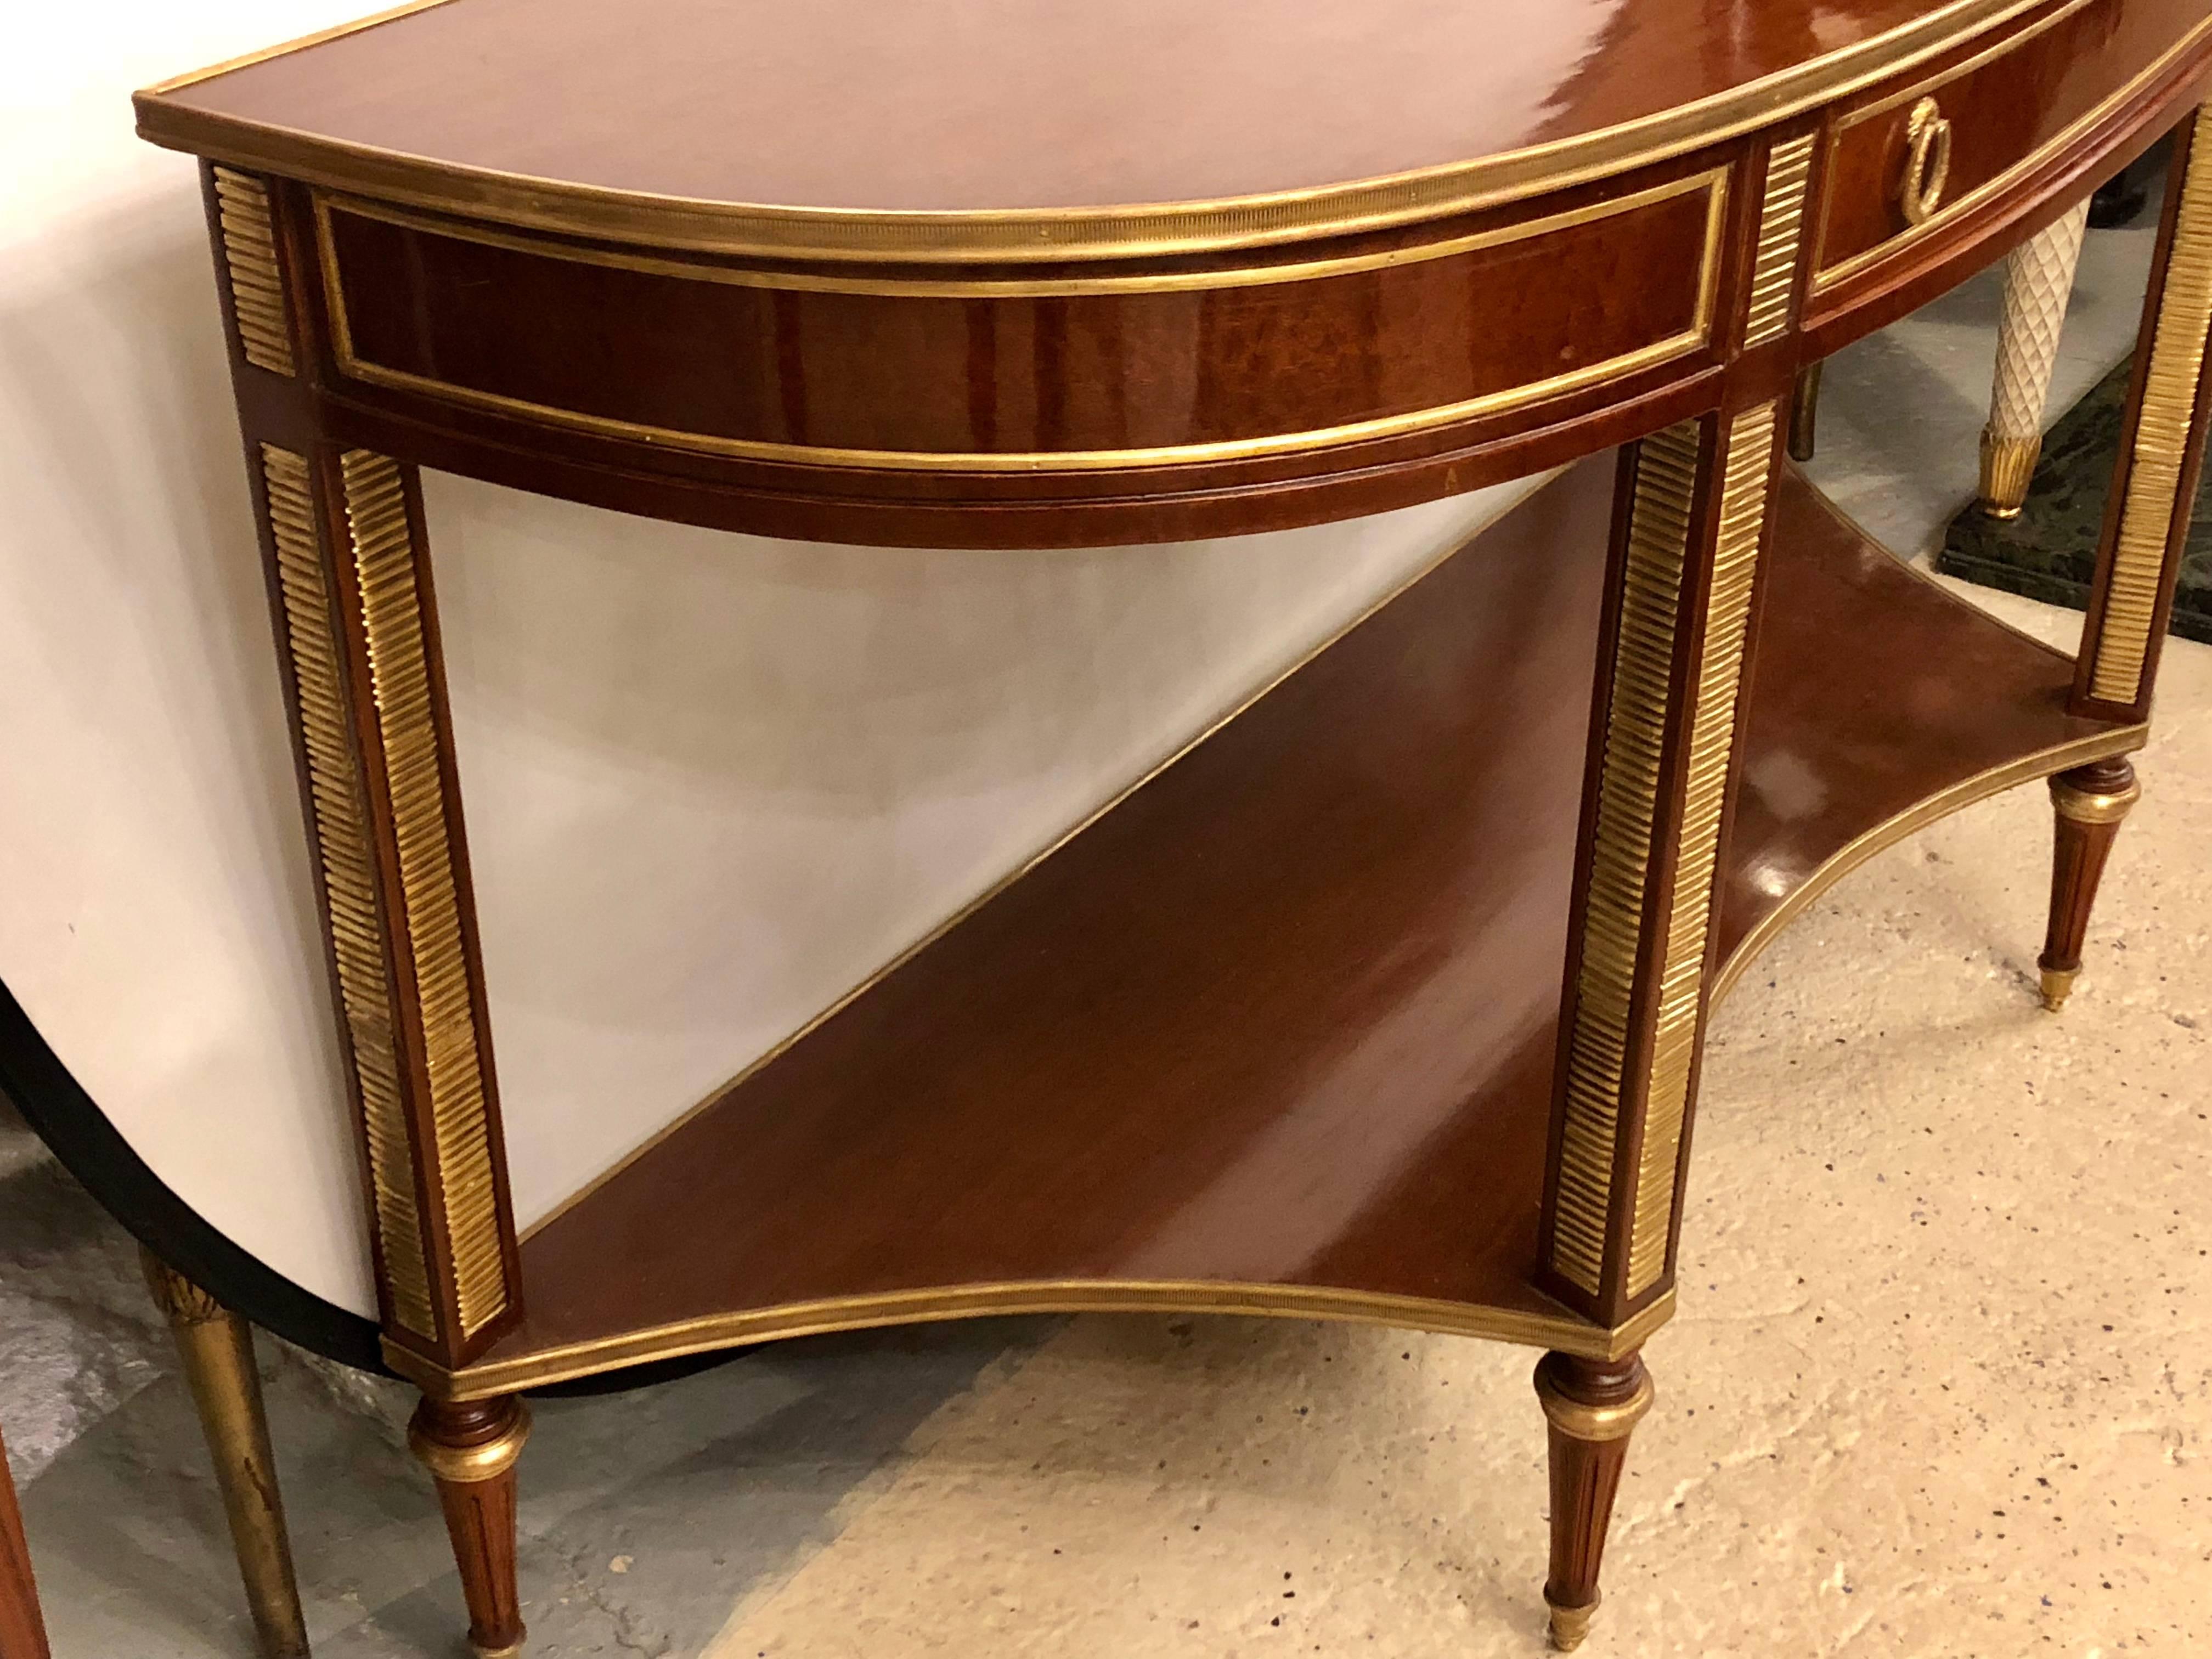 Pair of demilune mahogany bronze-mounted Russian neoclassical consoles with inverted lower shelves. This fine custom quality Louis XVI pair of consoles sit on bronze-mounted tapering legs leading to a inverted bronze framed shelf. The upper case has